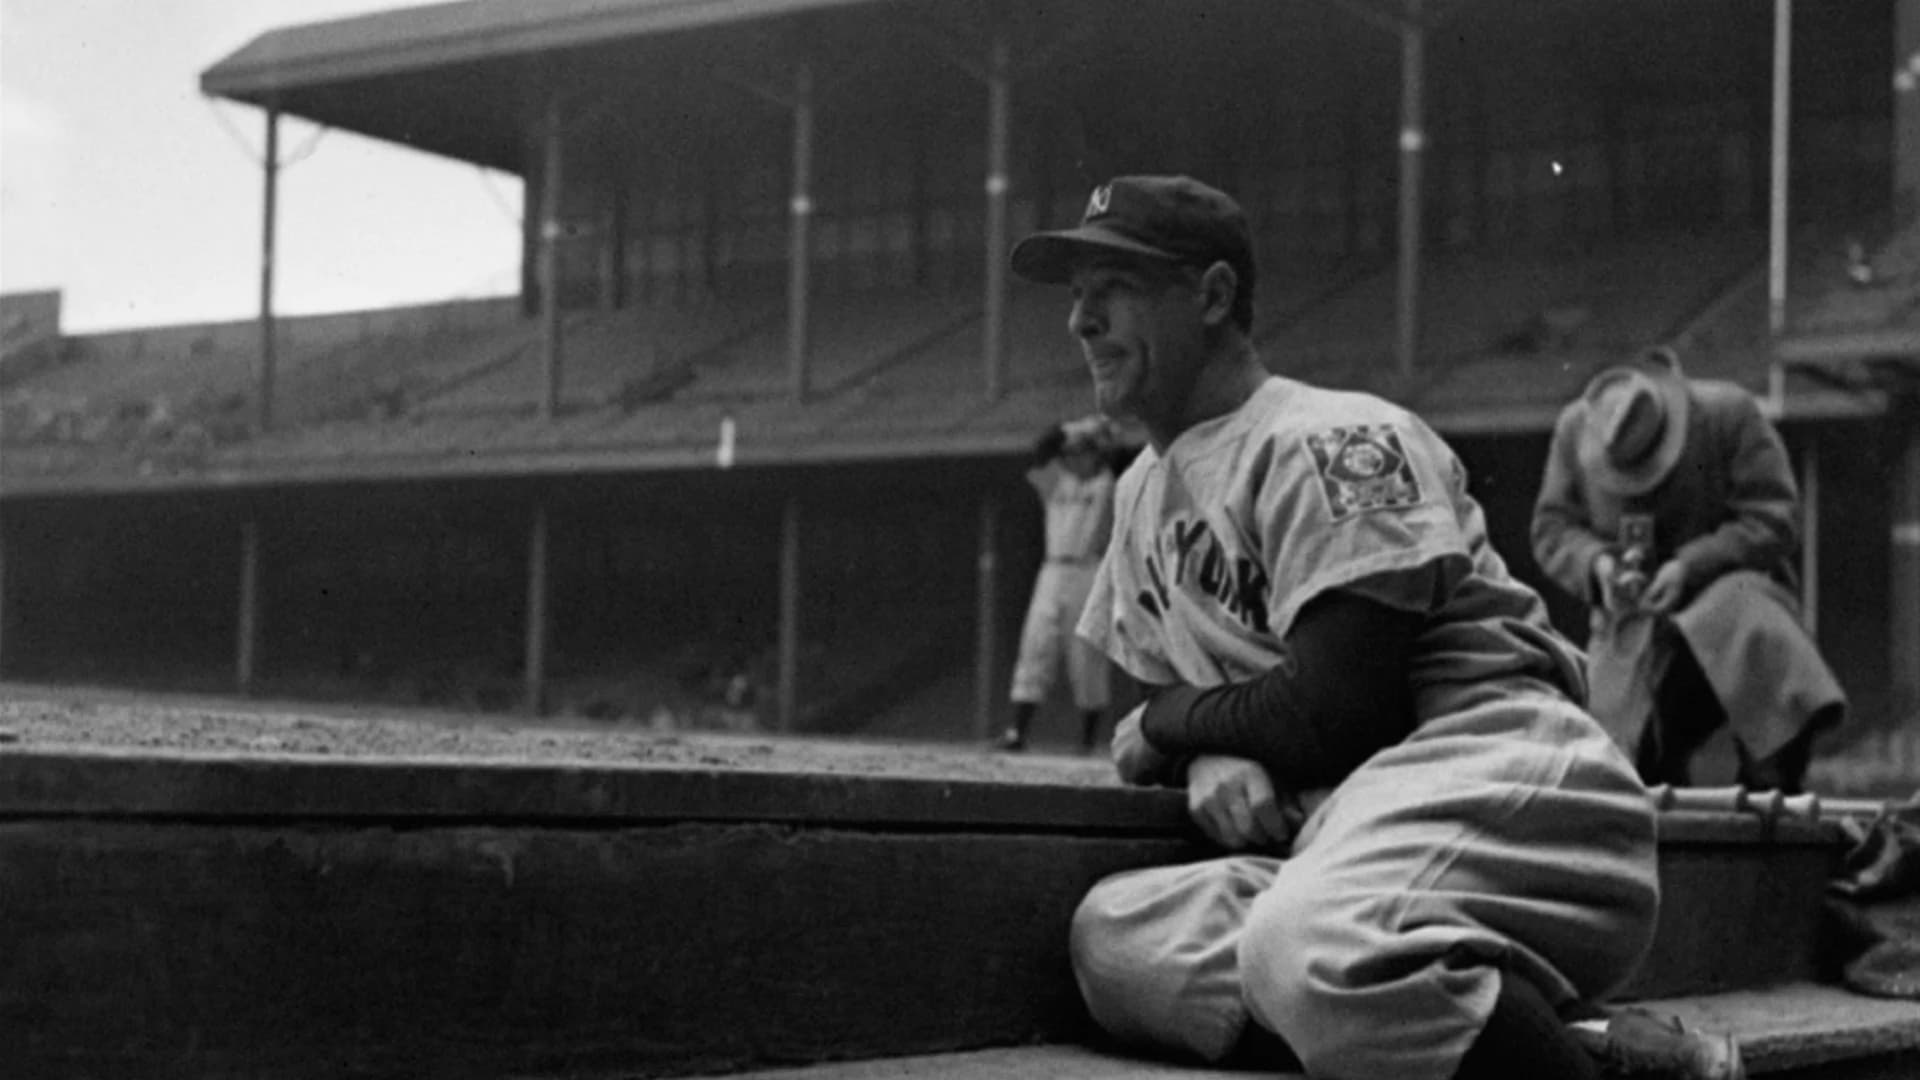 MLB's Lou Gehrig Day to celebrate his legacy, the ongoing fight against ALS